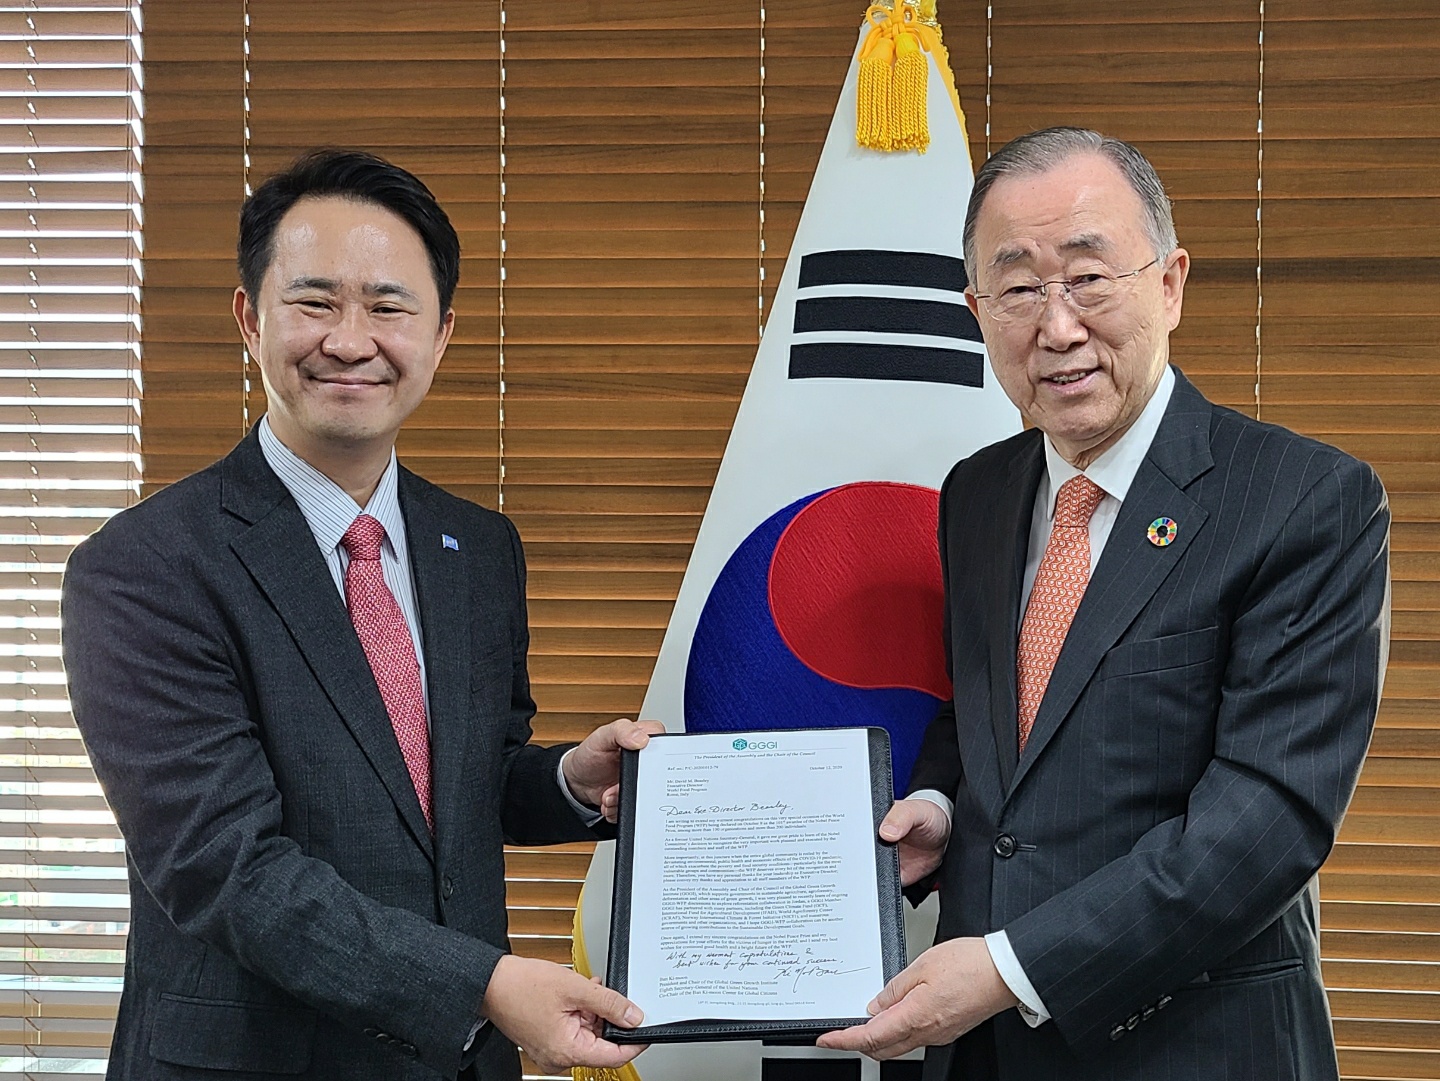 The 8th UN Secretary General Ban Ki-moon, Right, and the Director of WFP Korea Office Hyoung-joon Lim, Left, holding the letter.